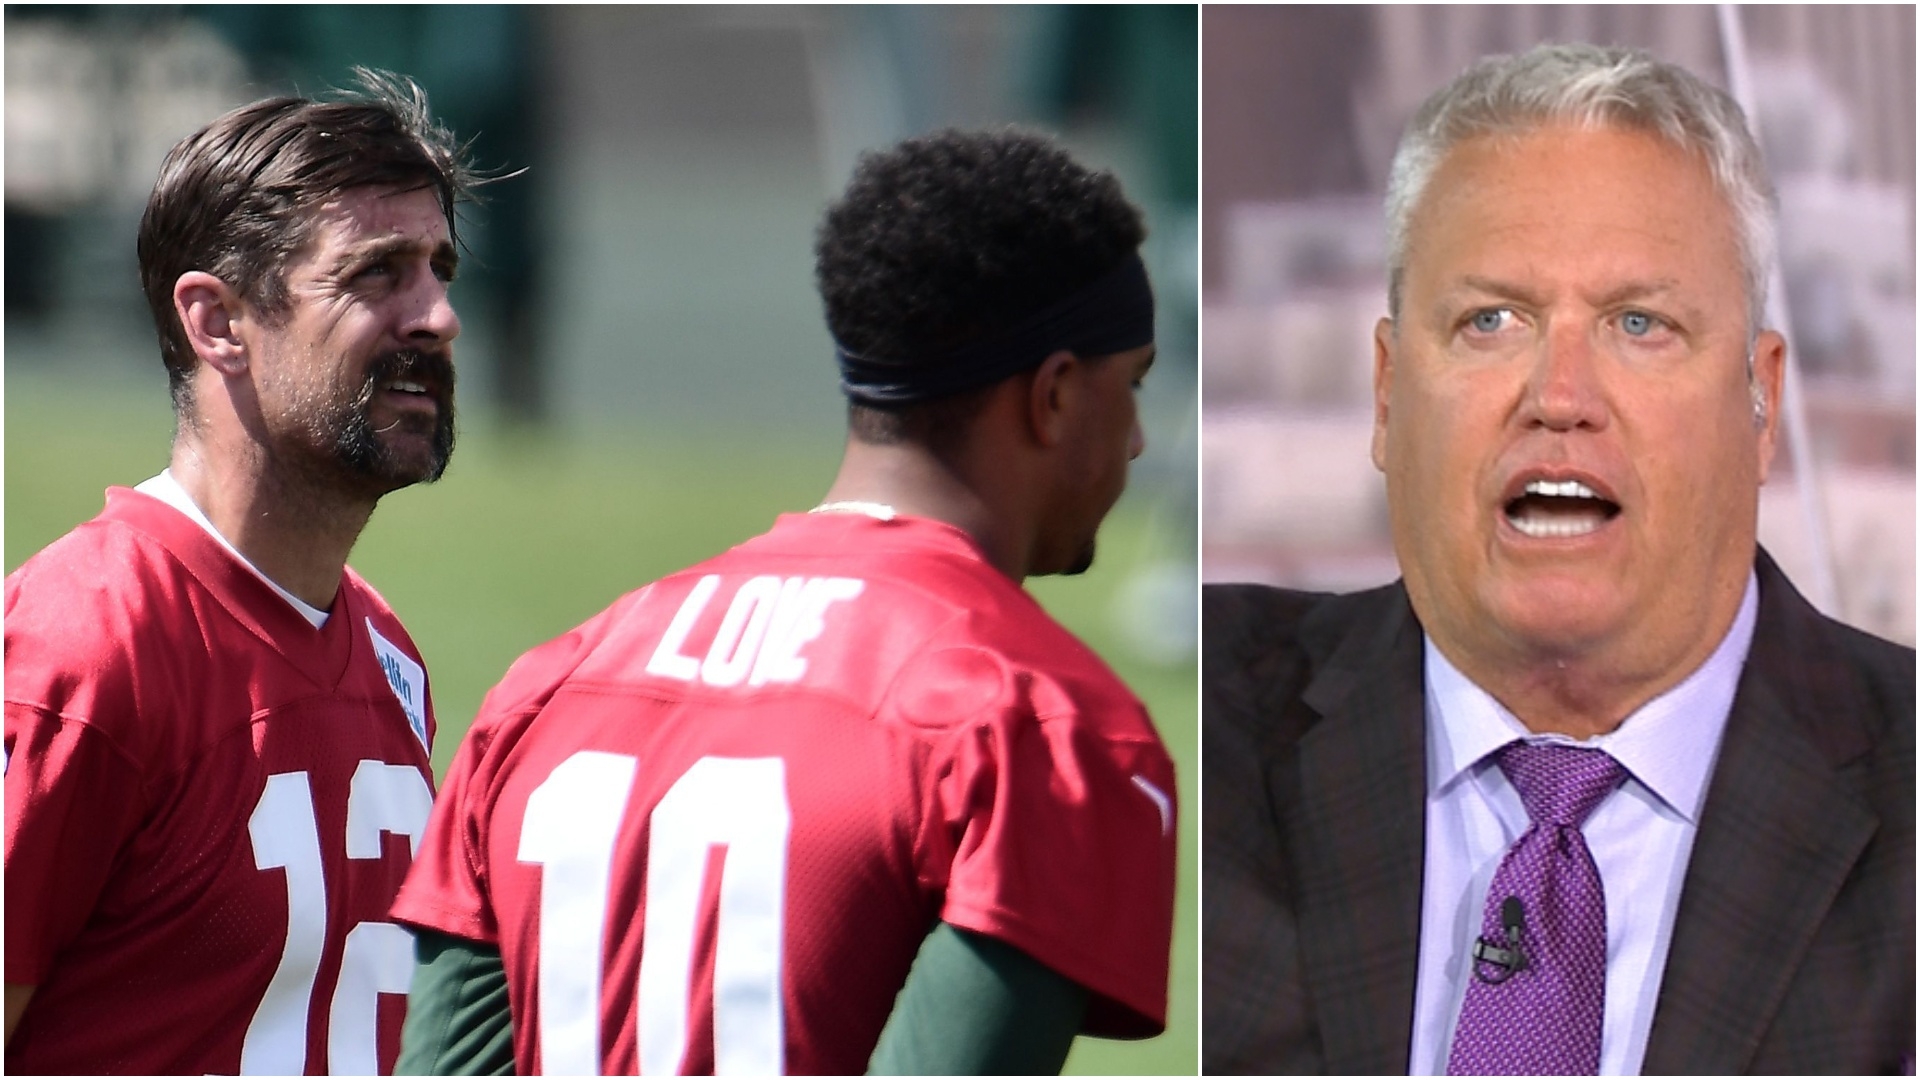 Rex calls Packers drafting Love, 'The most ridiculous thing I've seen in a draft'